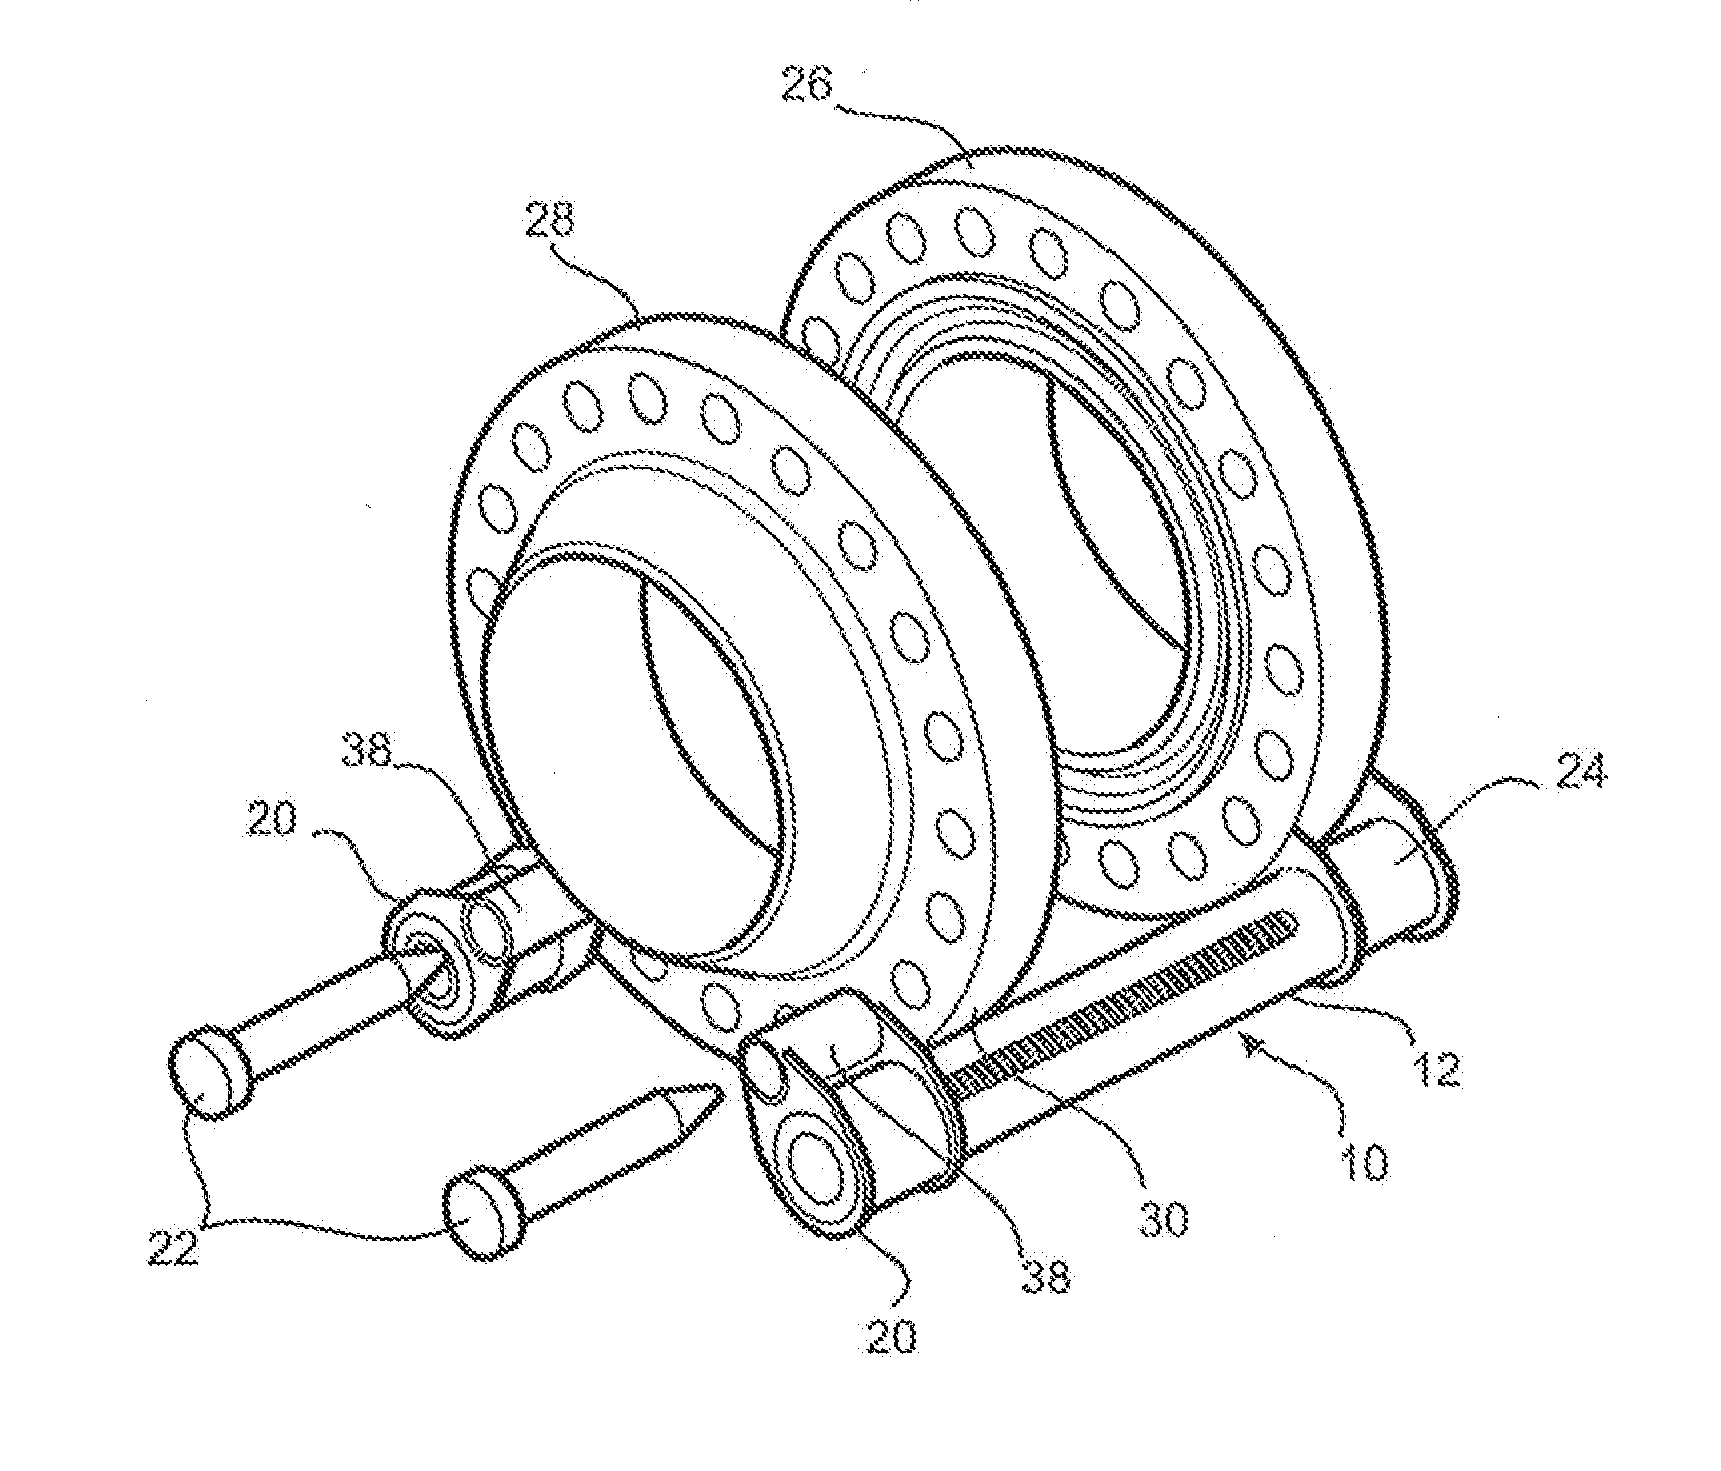 Flange catching, aligning and closing tool